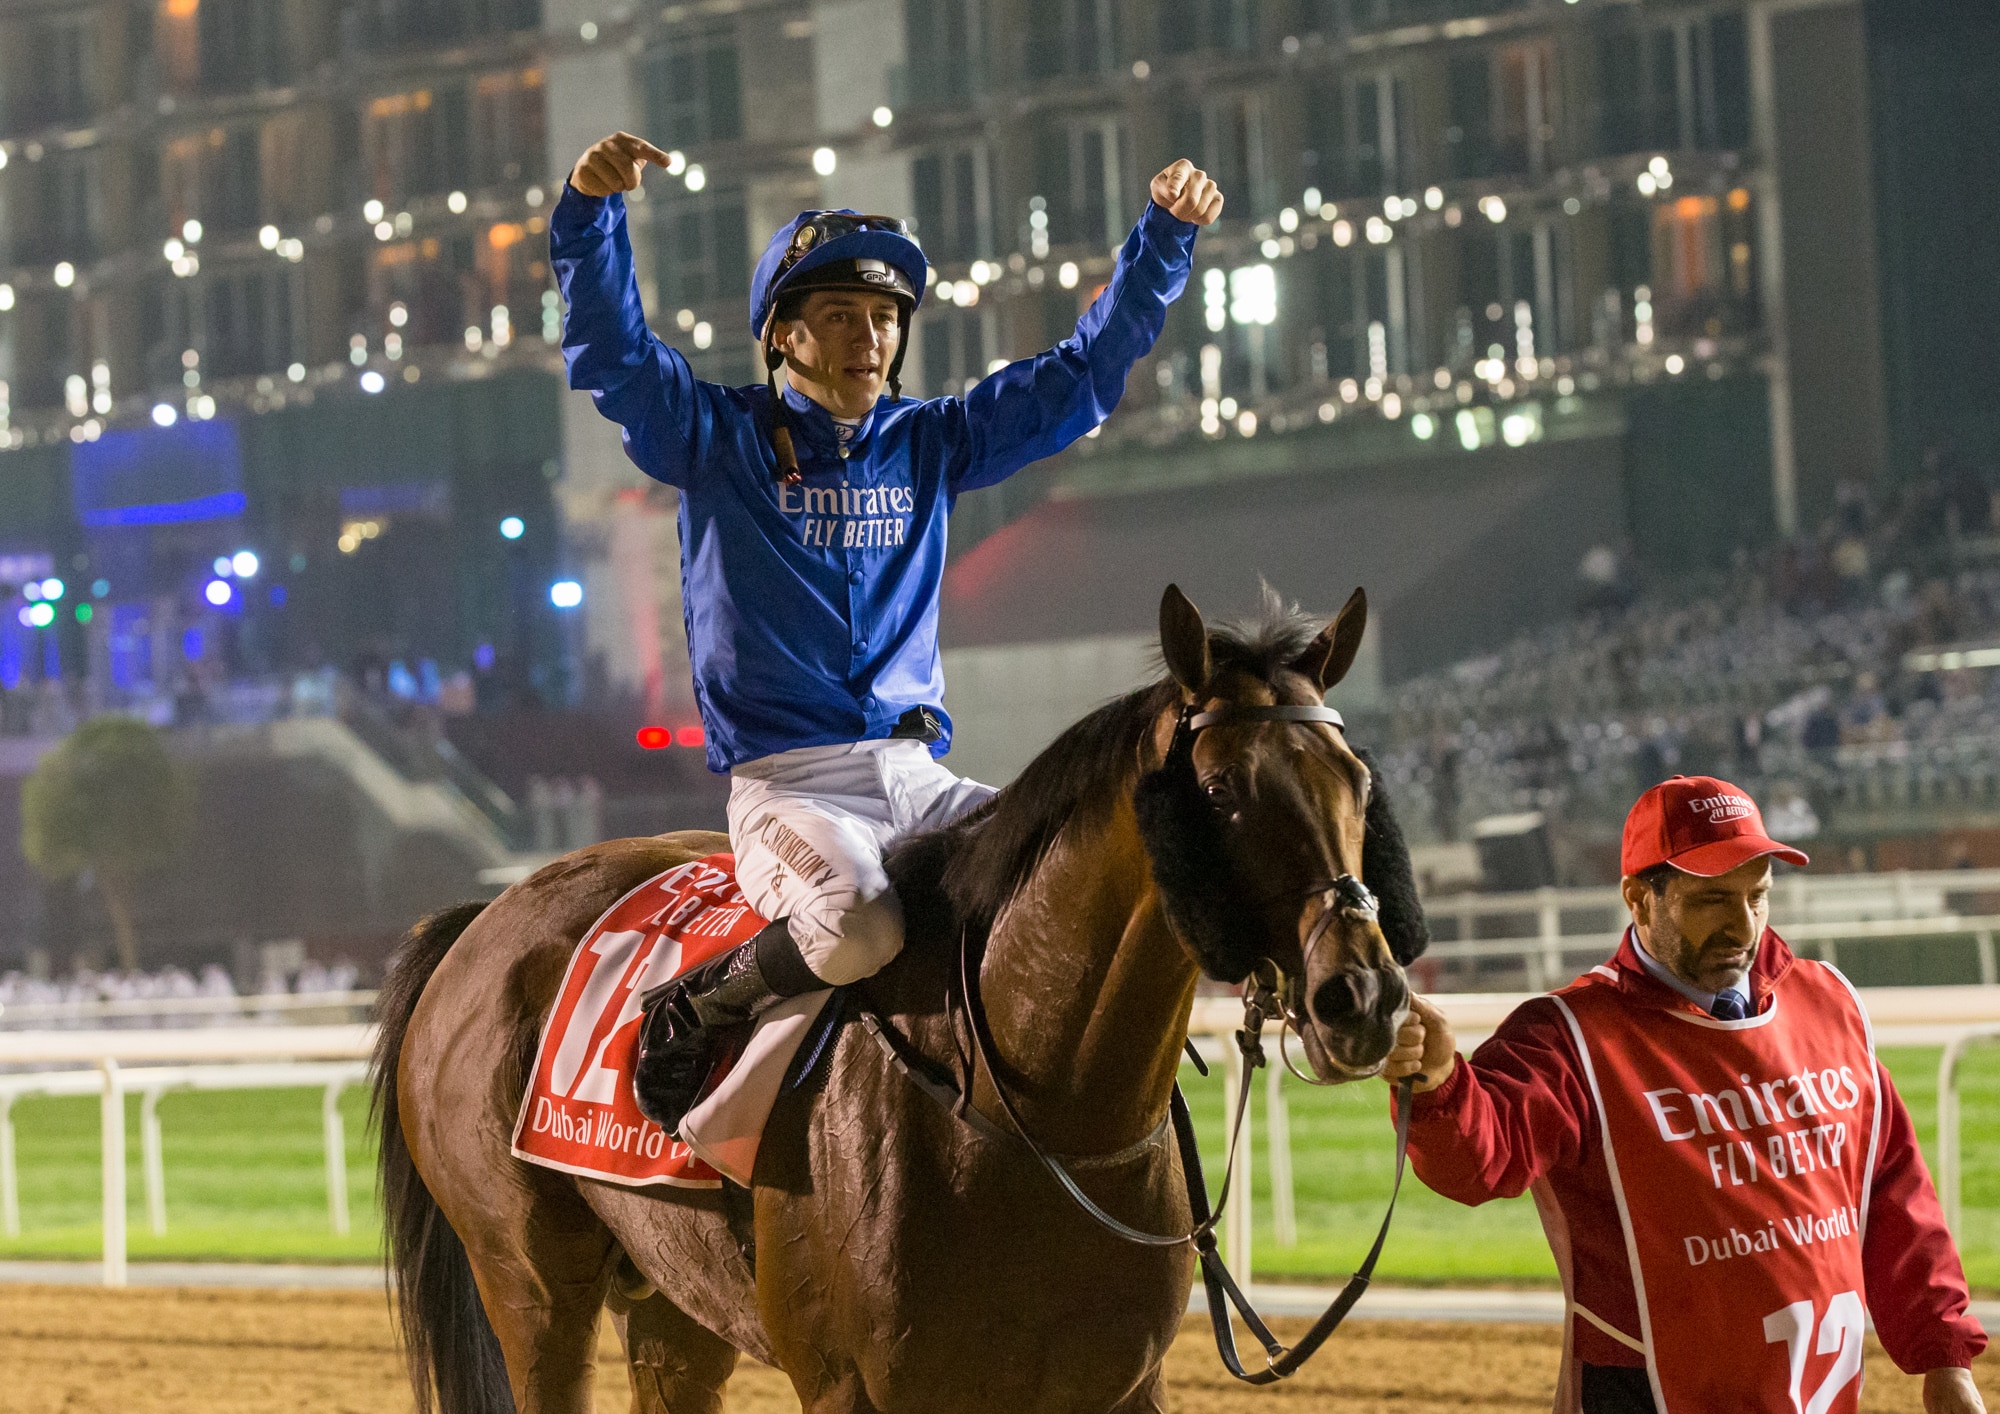 Voting Open for NTRA Moment of Year